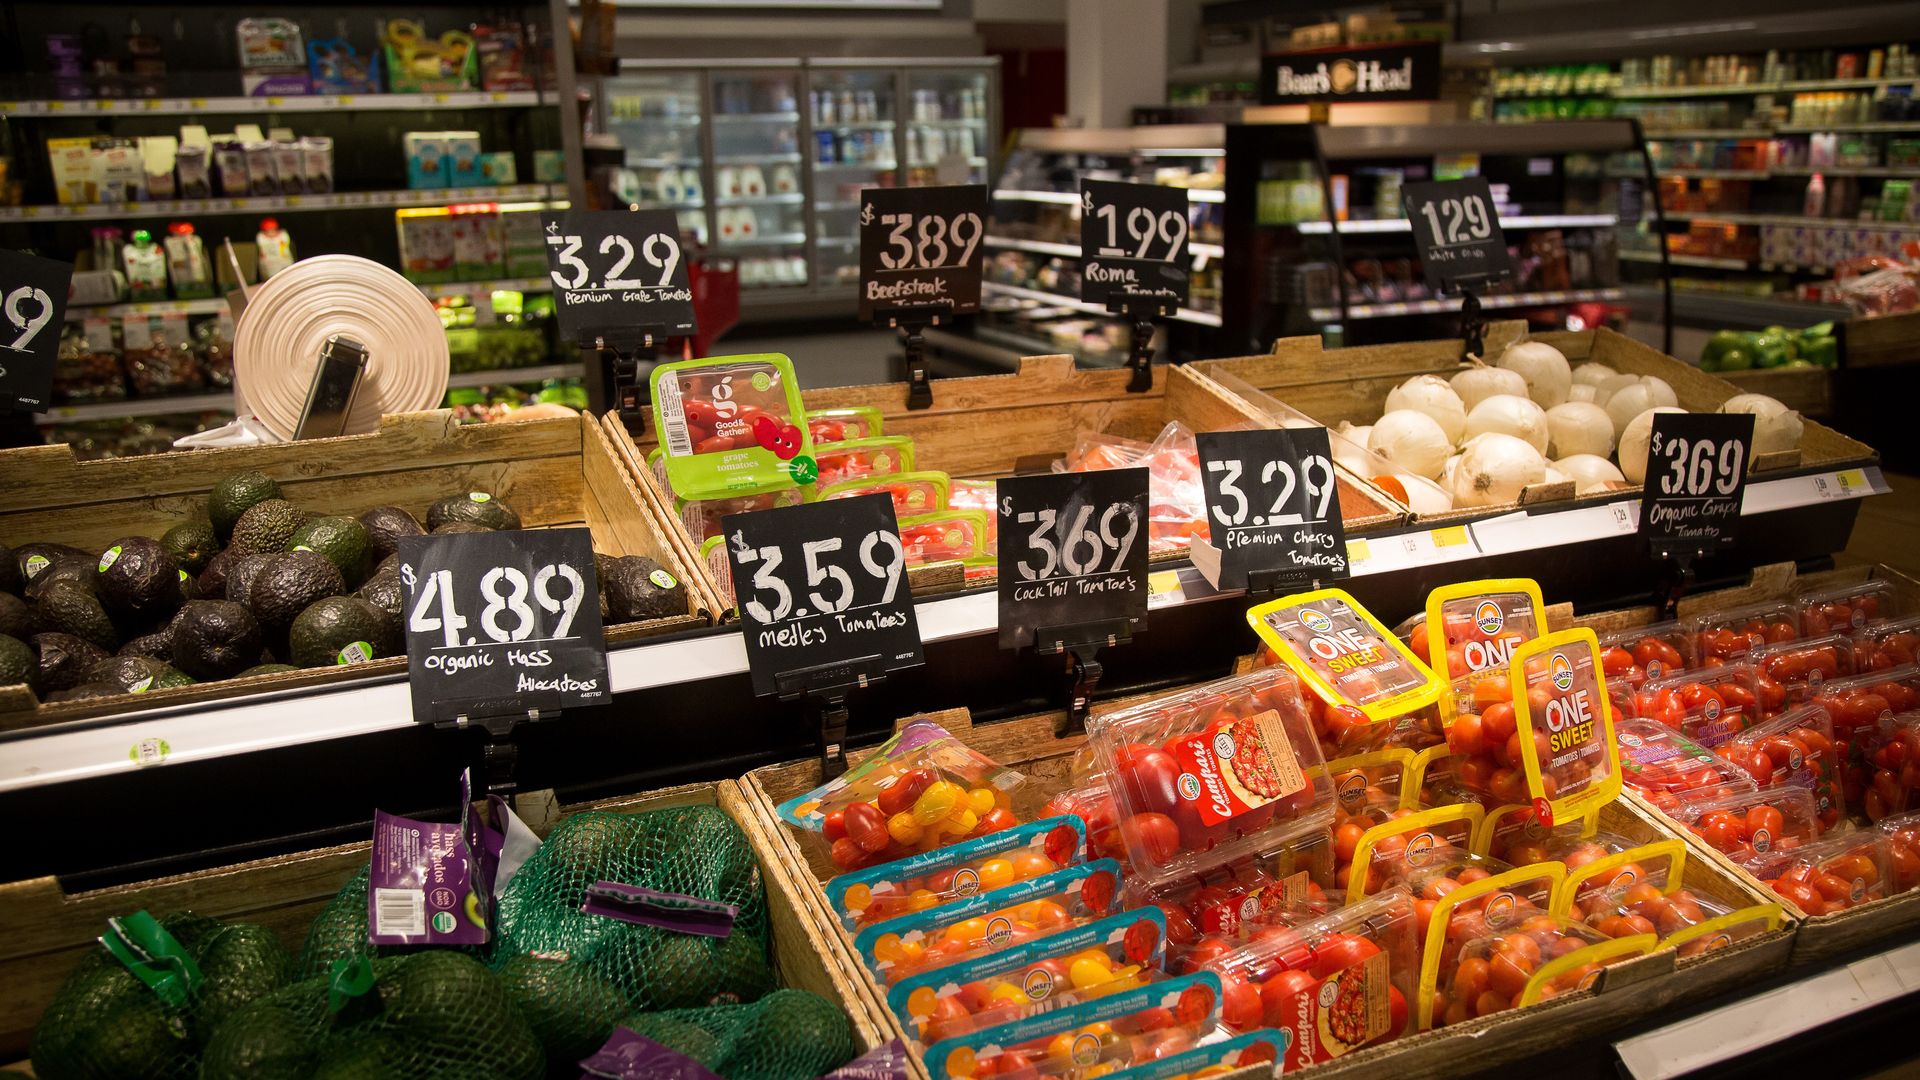 Prices shown at a grocery store